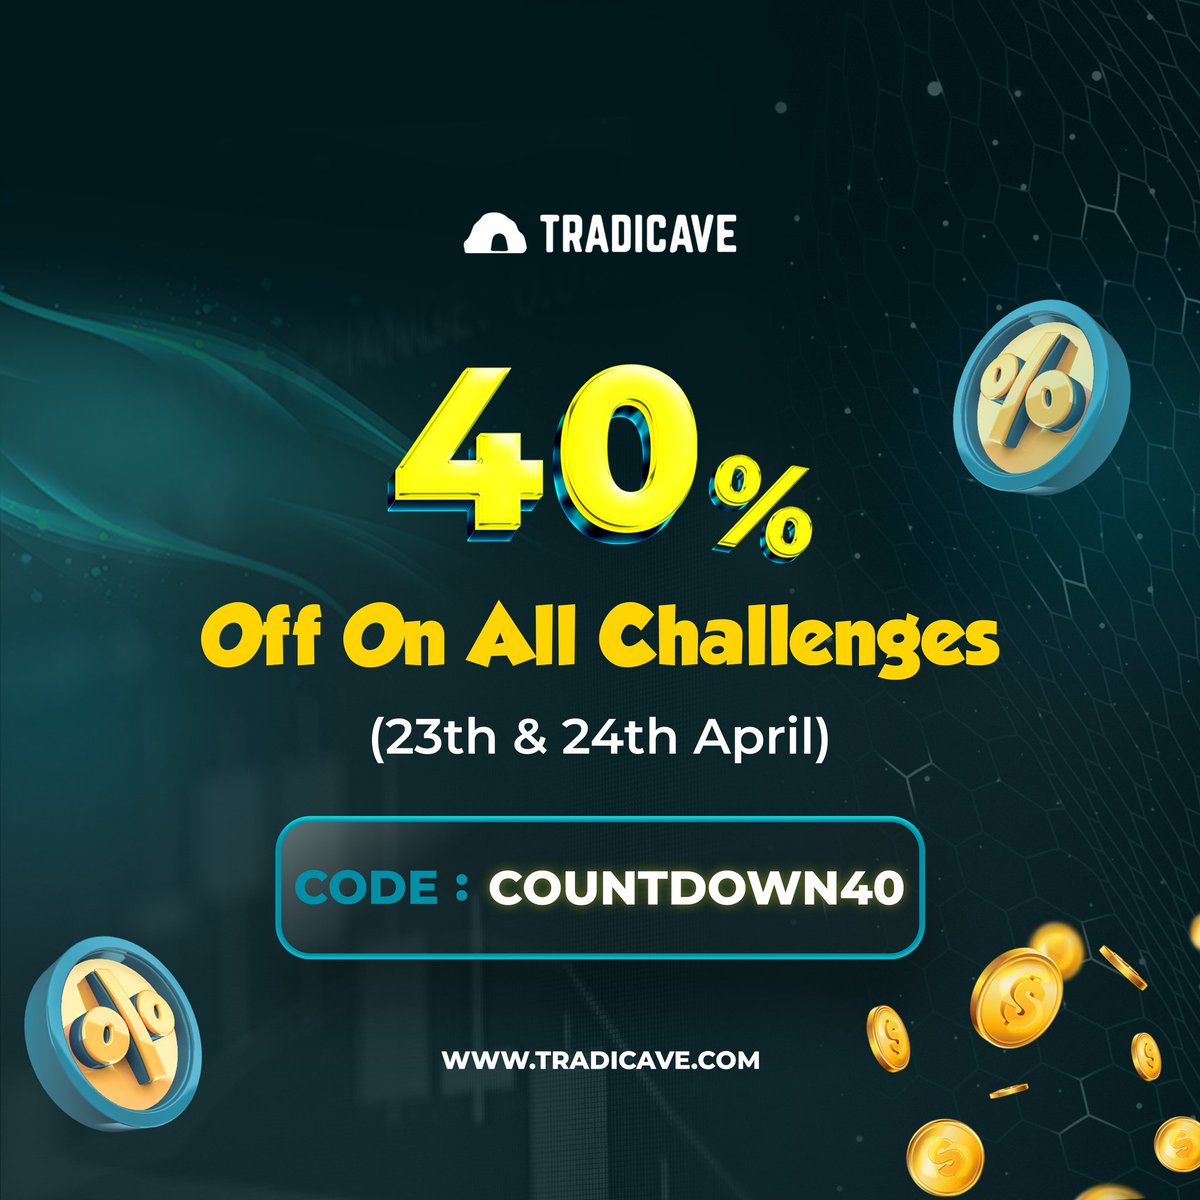 Get ready for a massive 40% OFF on all Challenges!💥 Save big with CODE: COUNTDOWN40 on the 23rd & 24th of April! Don't miss out! 💰 Follow @Tradicave For more visit: tradicave.com #tradicave #propfirm #proptrading #propfirmtrader #forextrading #smc #moneymindset